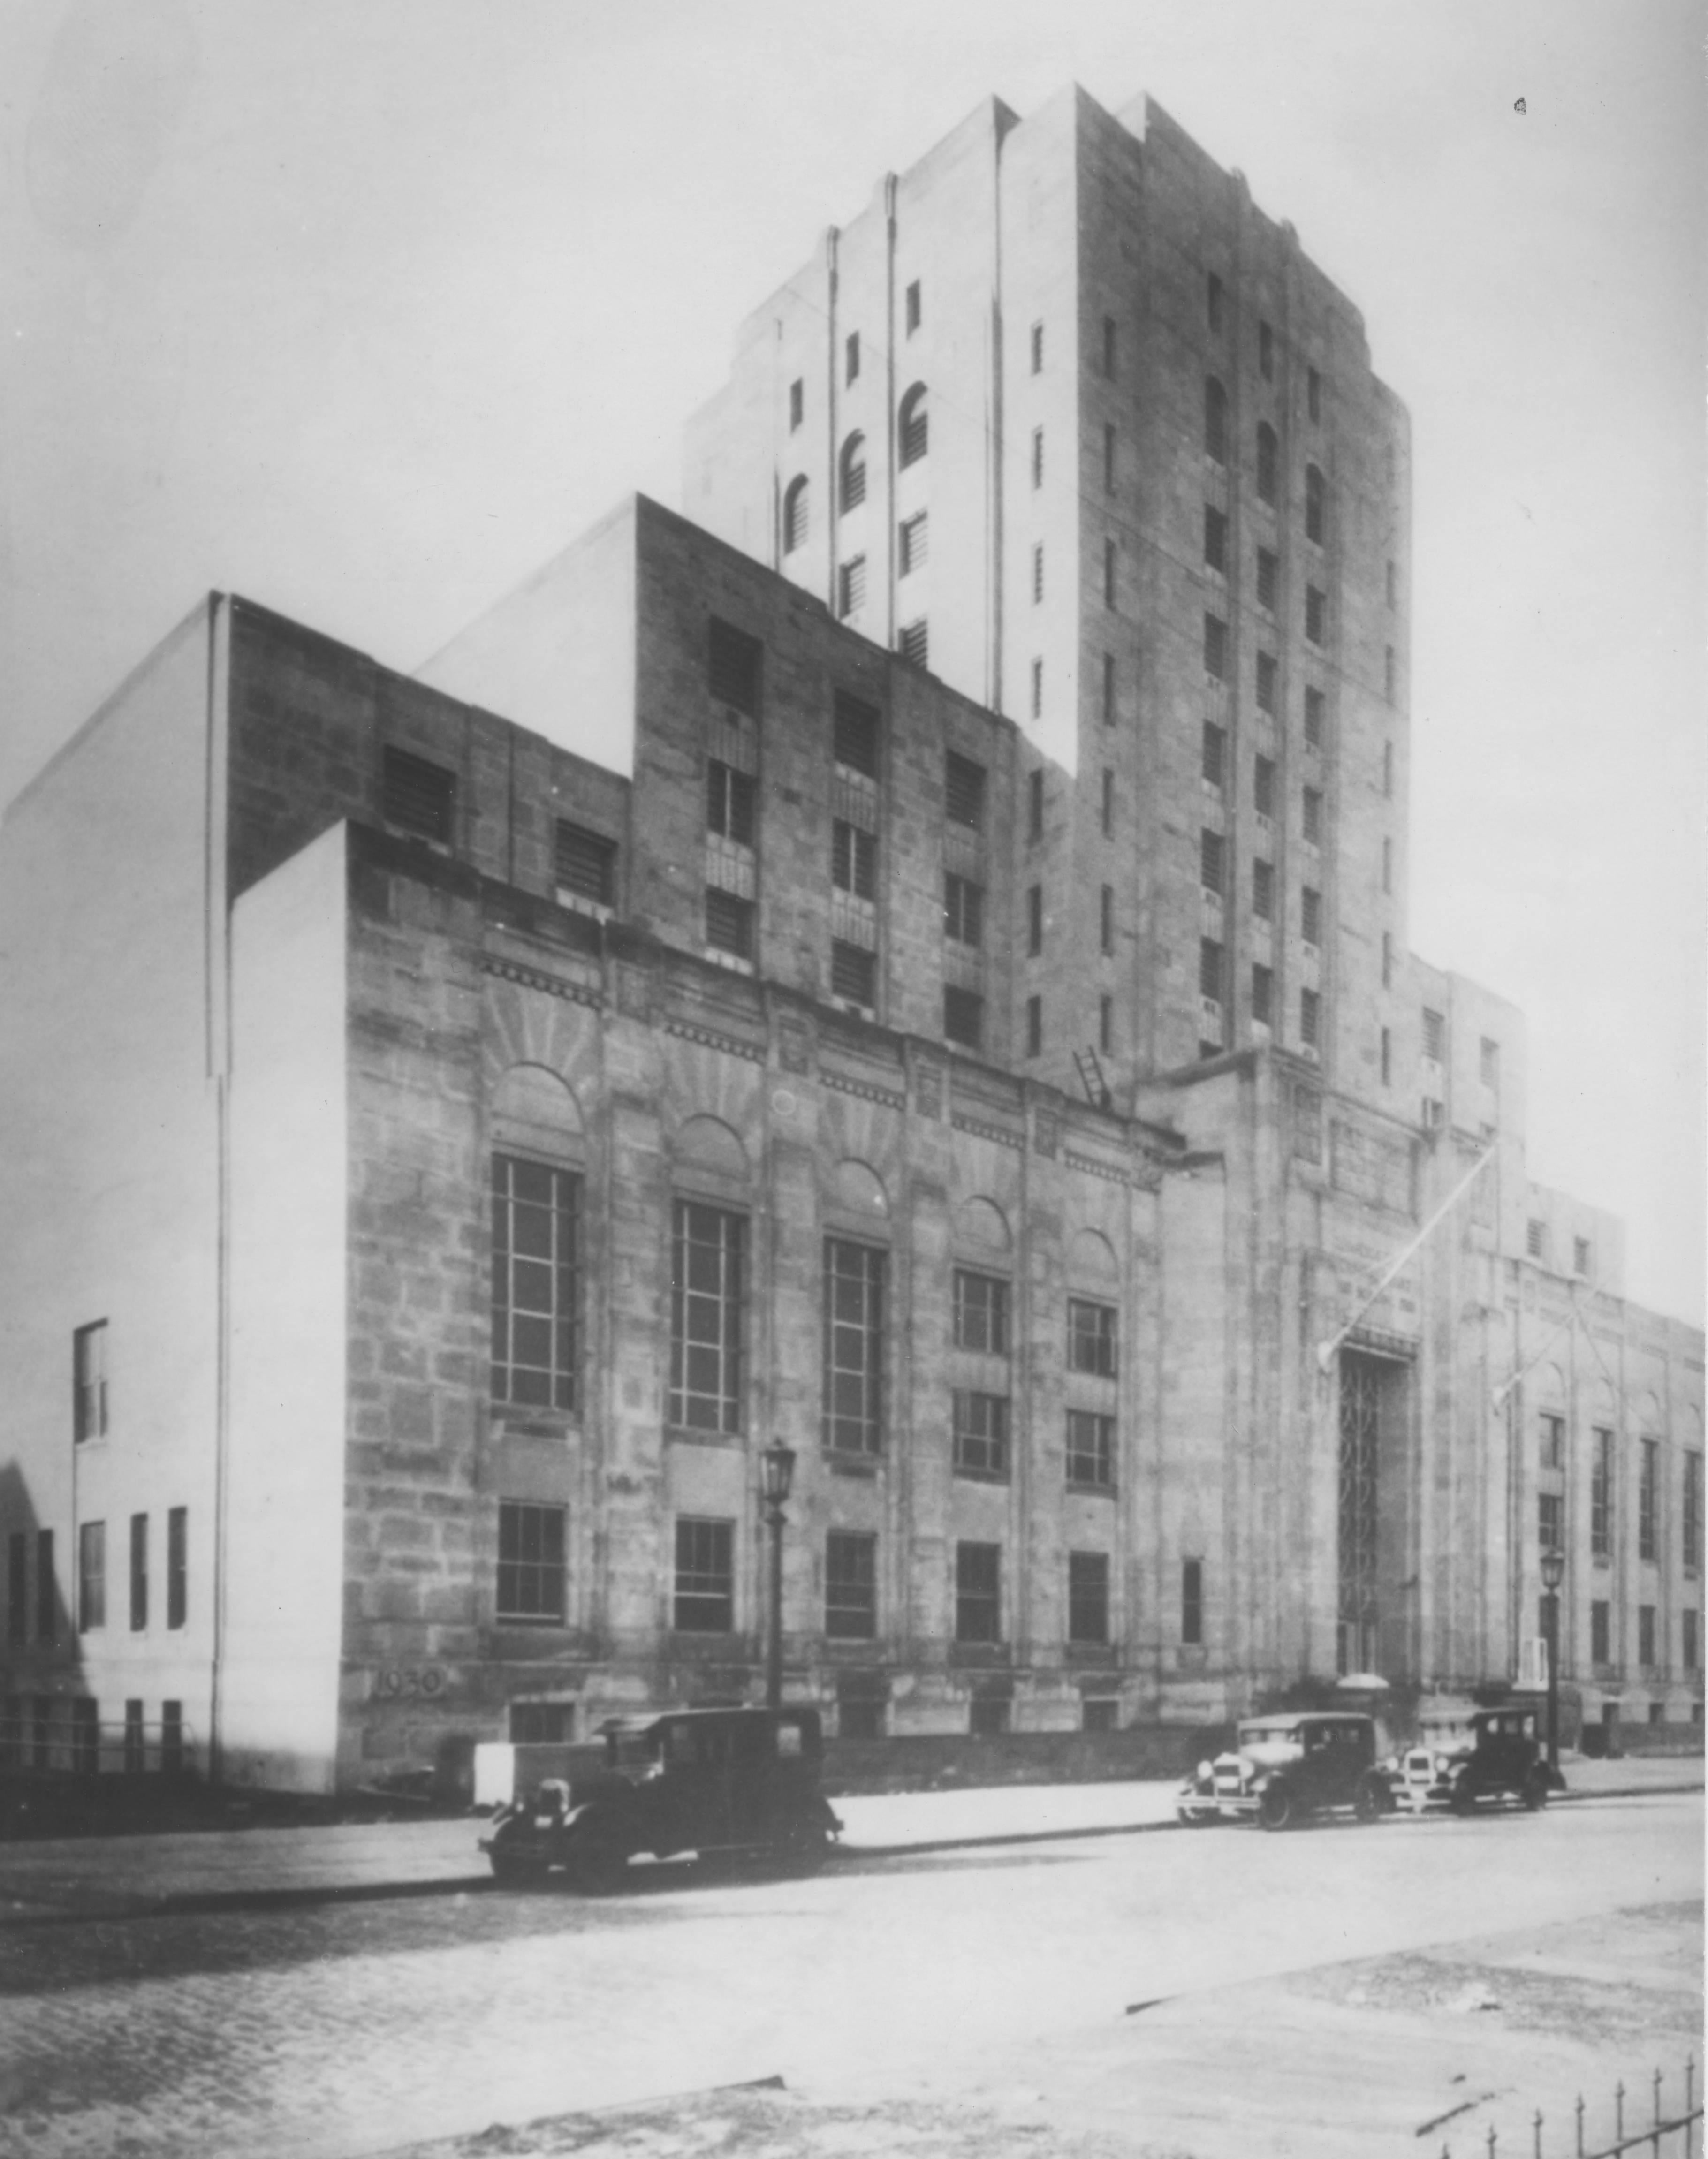 A black and white photo of the Cuyahoga County Jail and Criminal Courts Building in 1931, a towering stone structure.